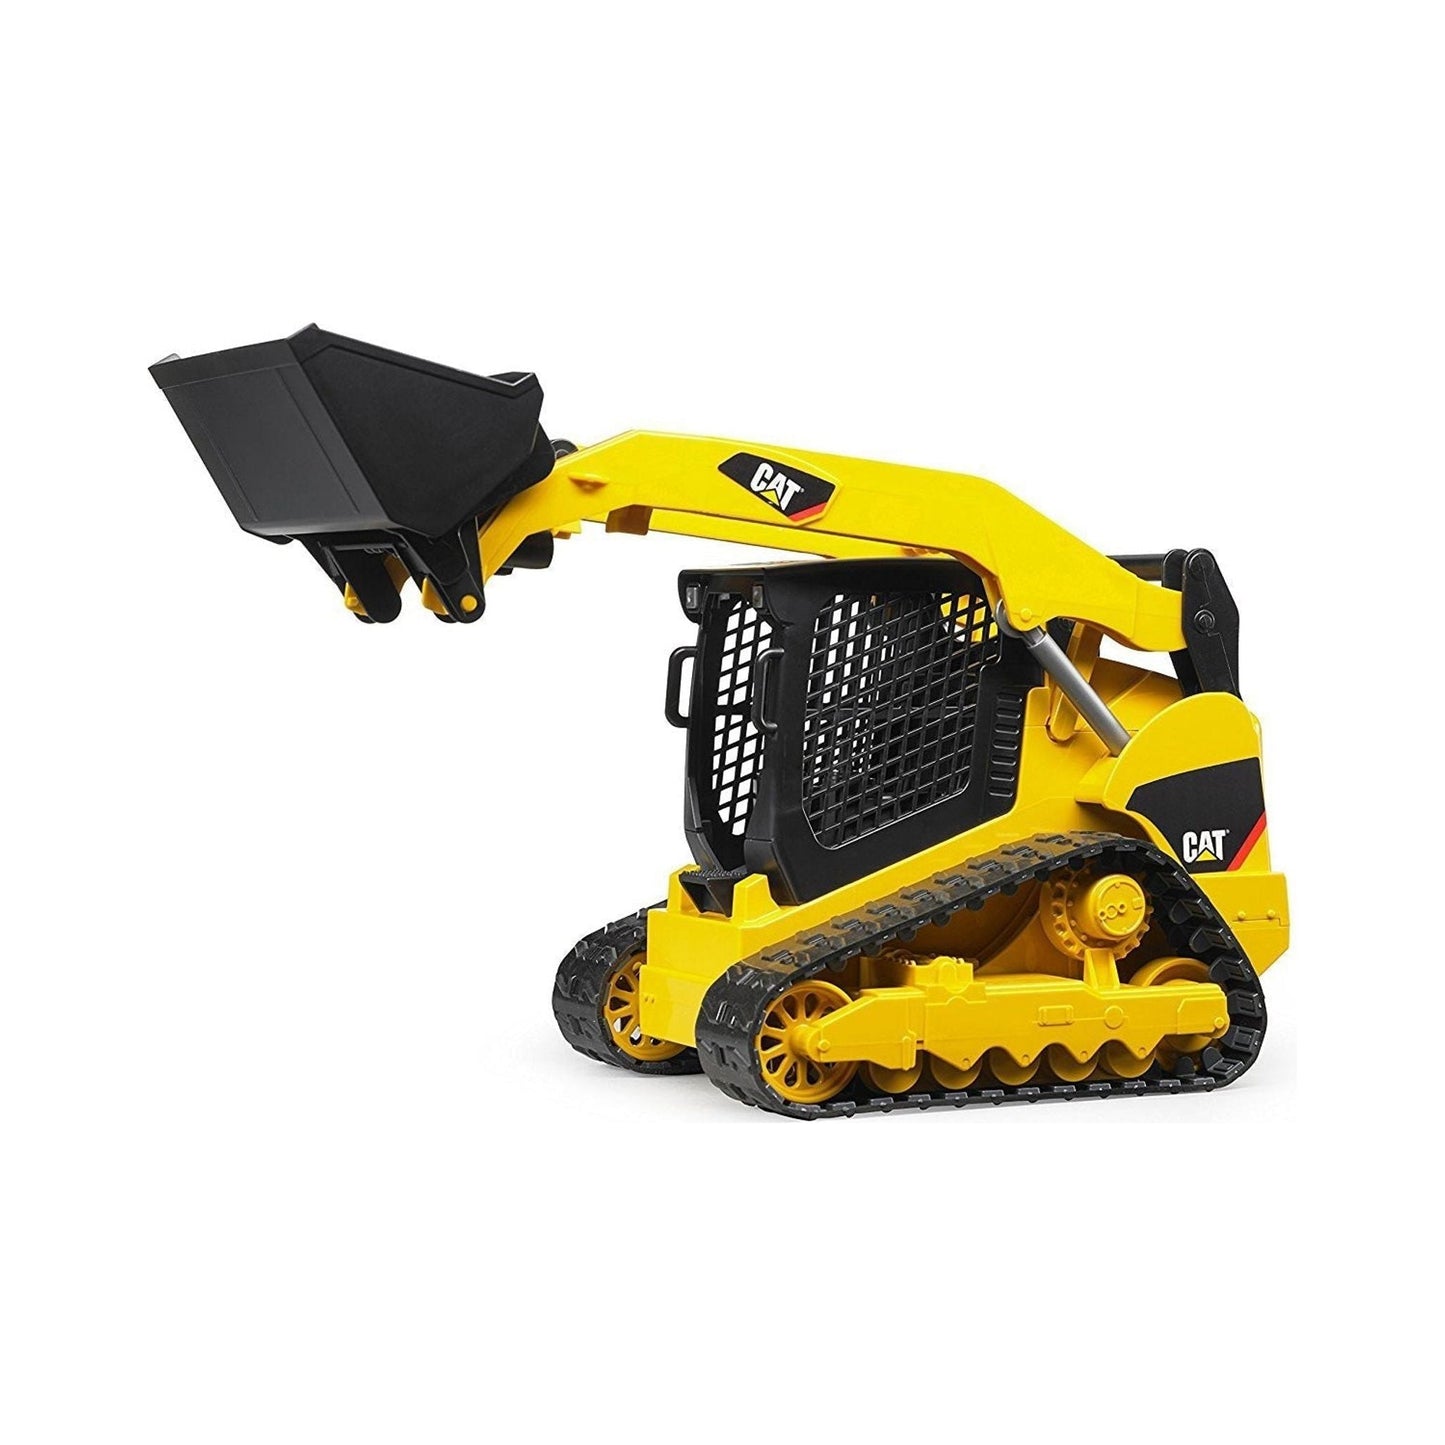 1:16 CATERPILLAR Compact Track Loader - Toybox Tales